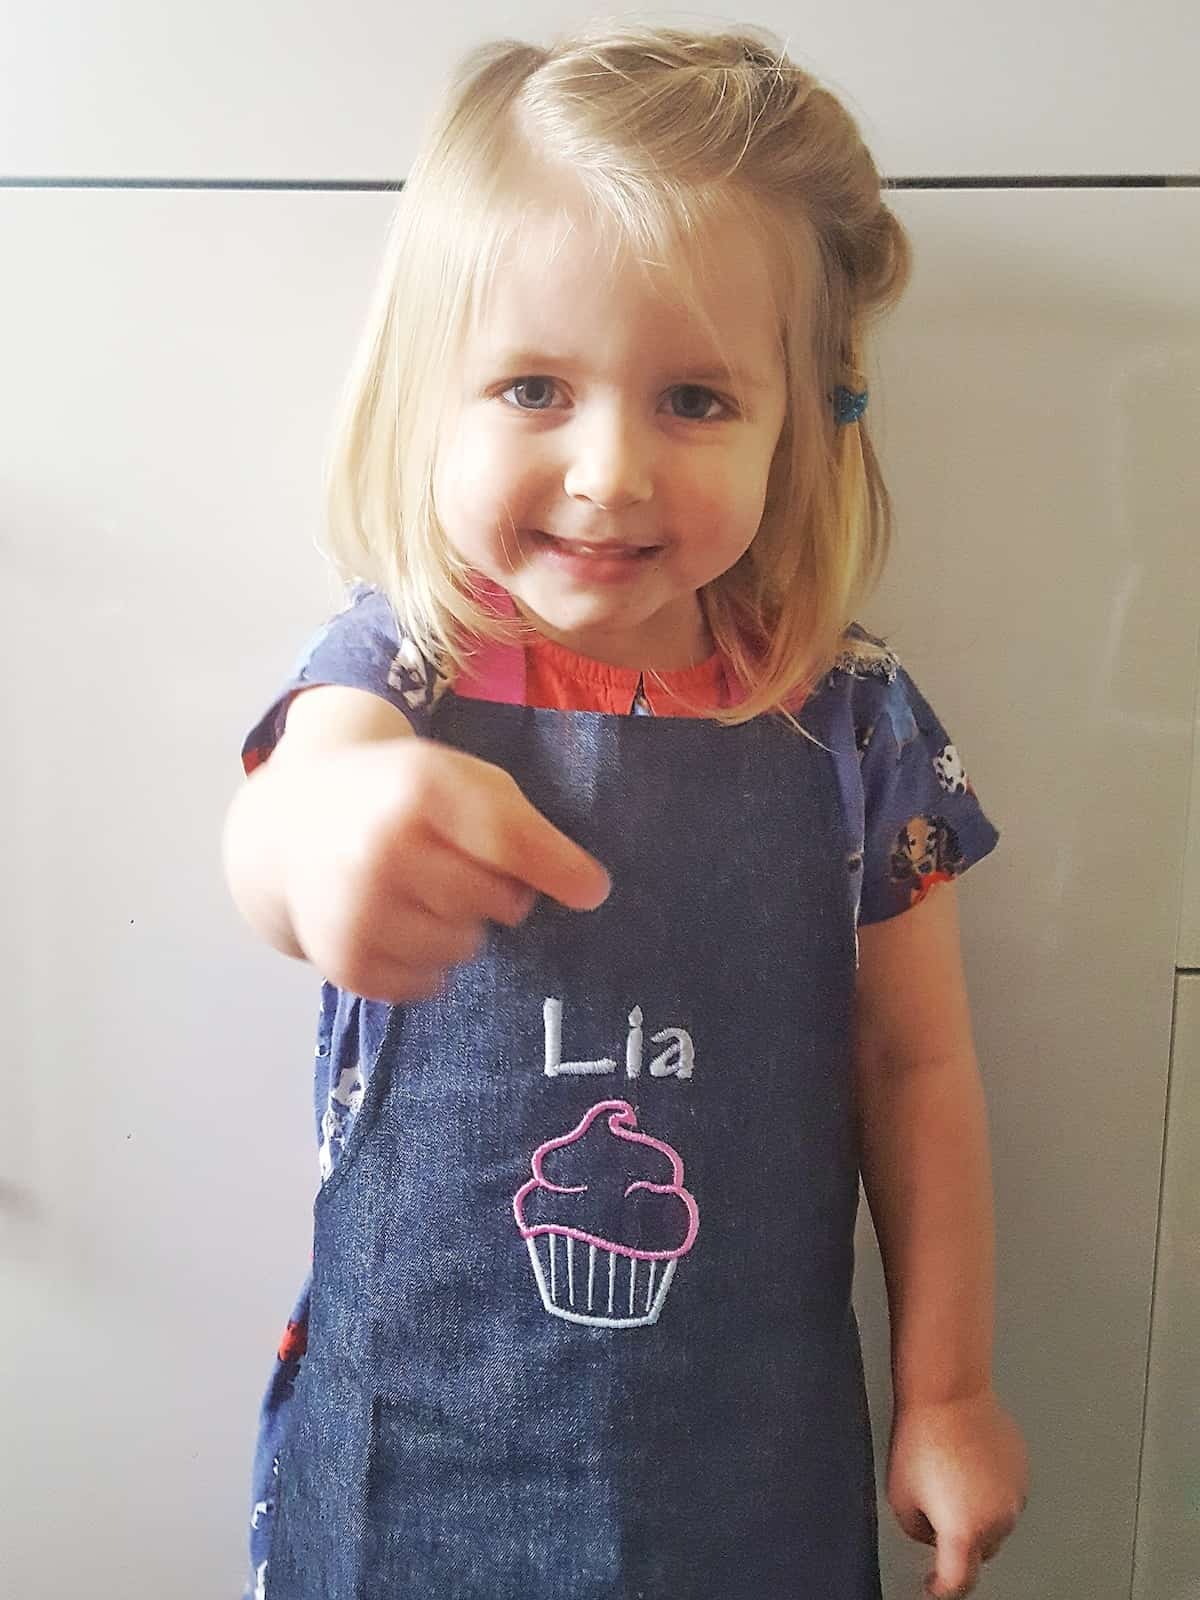 Arty apple focus is on quality, affordability and the personal touch that comes with each item being specially made for the child who will receive it. We have reviewed the personalised girls' aprons and you have the chance to win one. 